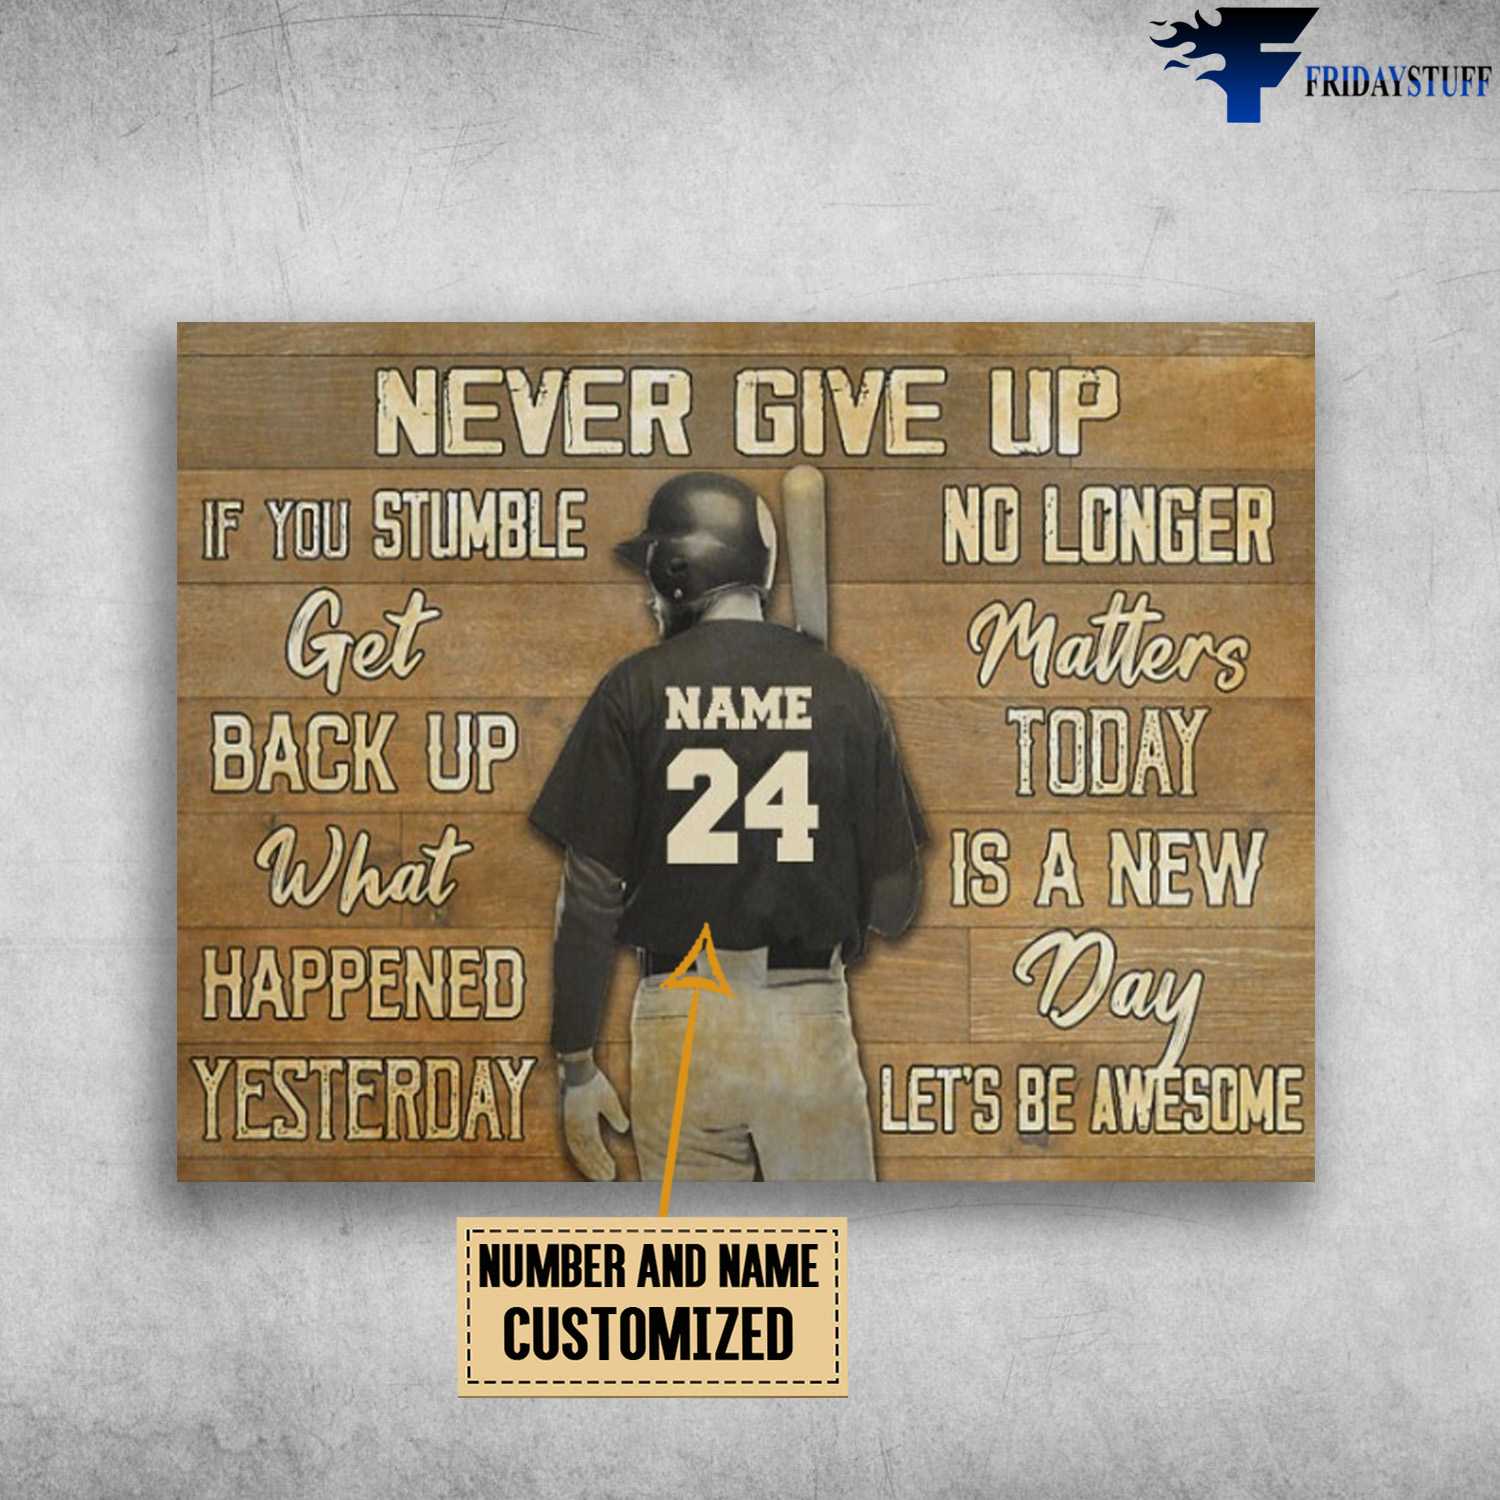 Baseball Poster, Baseball Lover, Never Give Up, If You Stumble, Get Back Up, What Happened Yesterday, No Longer Matters, Today Is A New Day, Let's Be Awesome